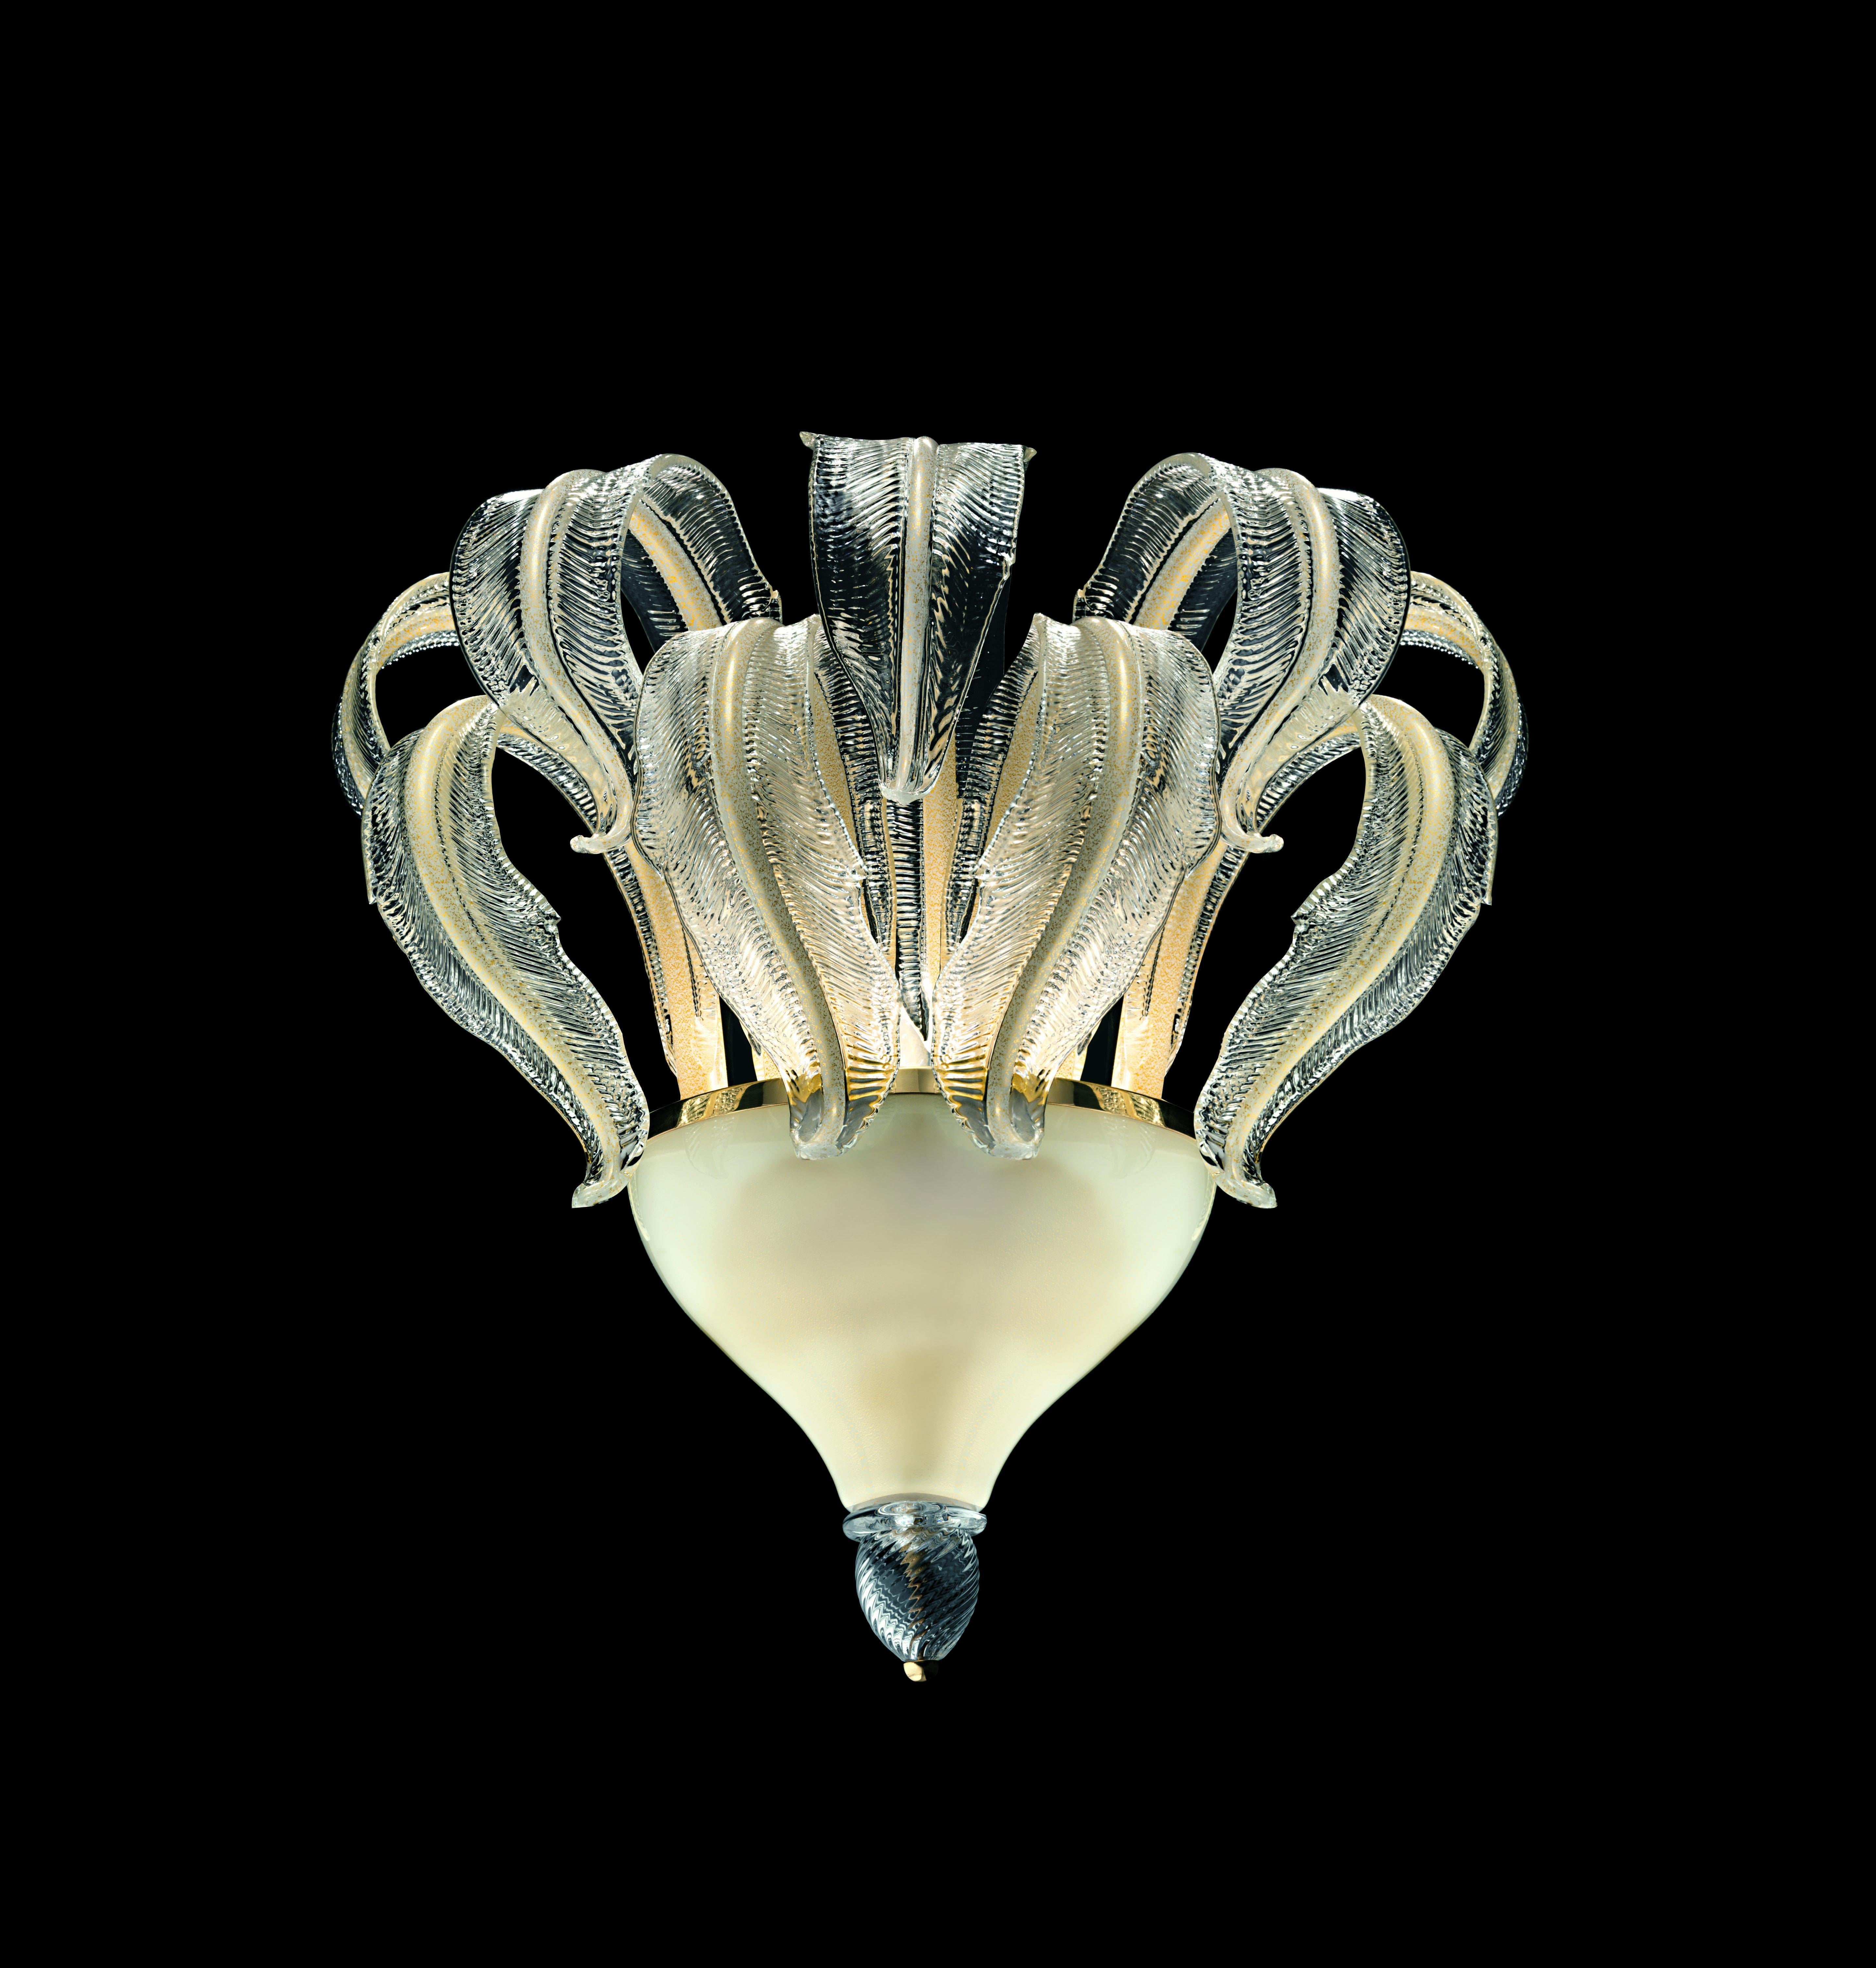 Modern Piume 5390 Wall Sconce in Beige Gold Glass, by Barovier&Toso